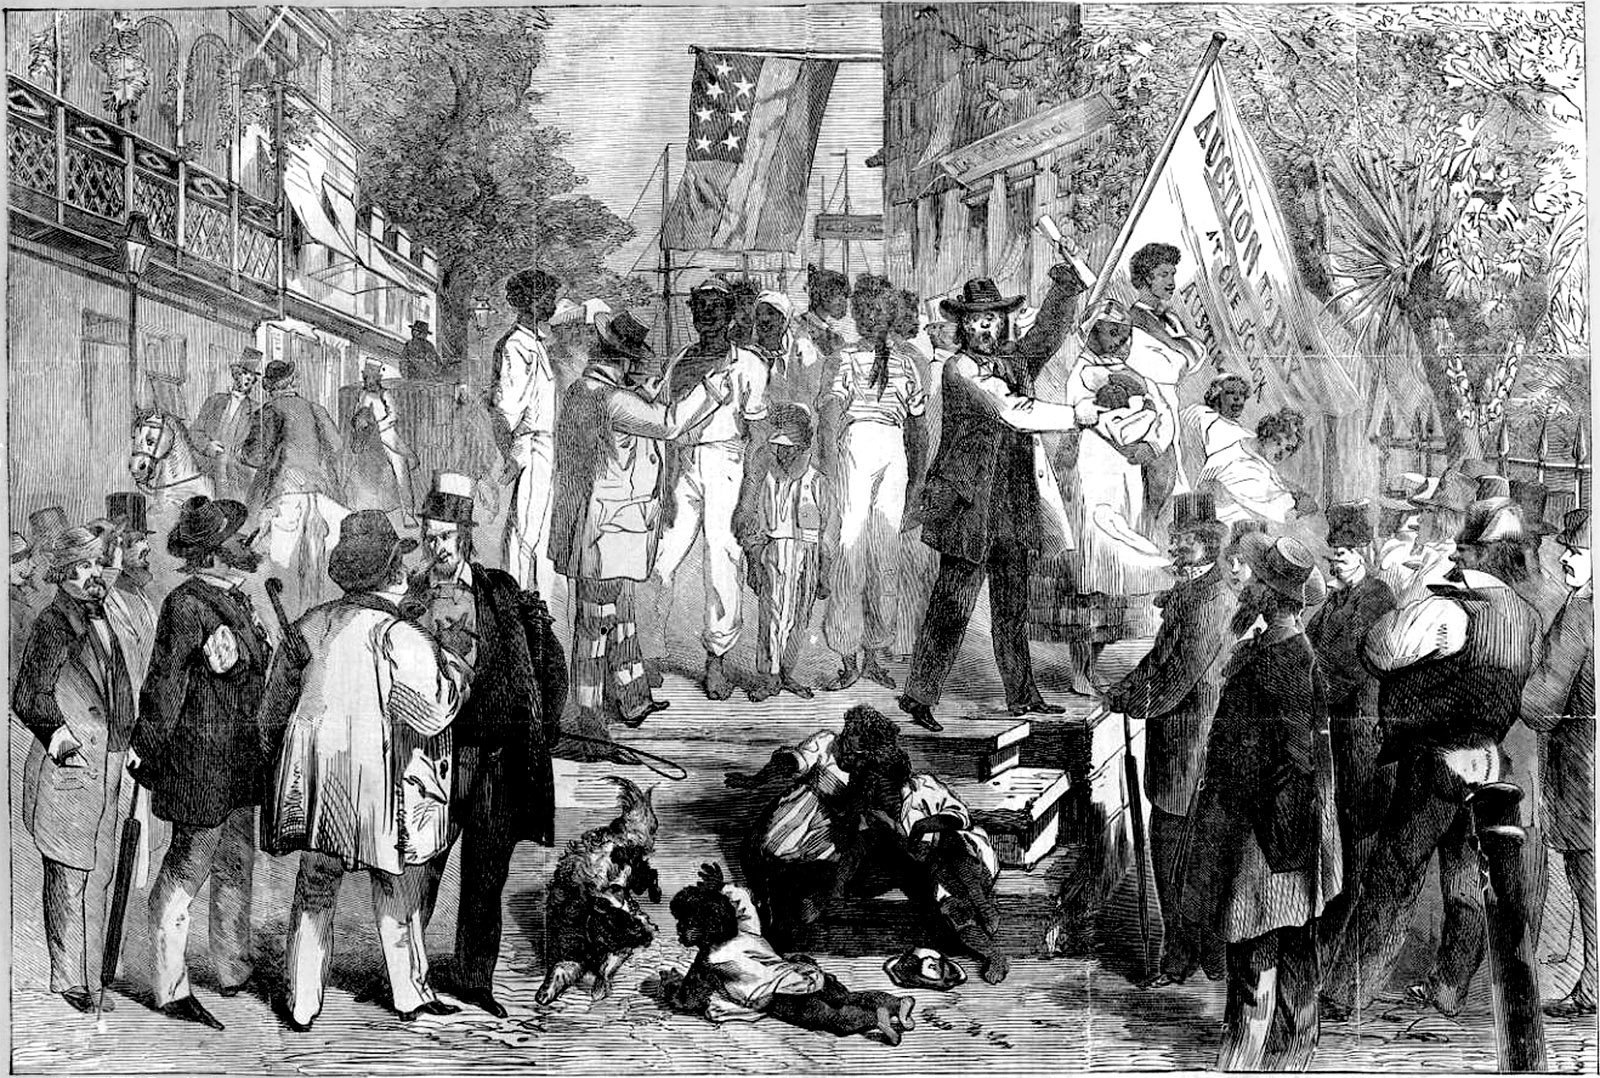 A slave auction in Austin, Texas; illustration from Harper’s Weekly, 1861